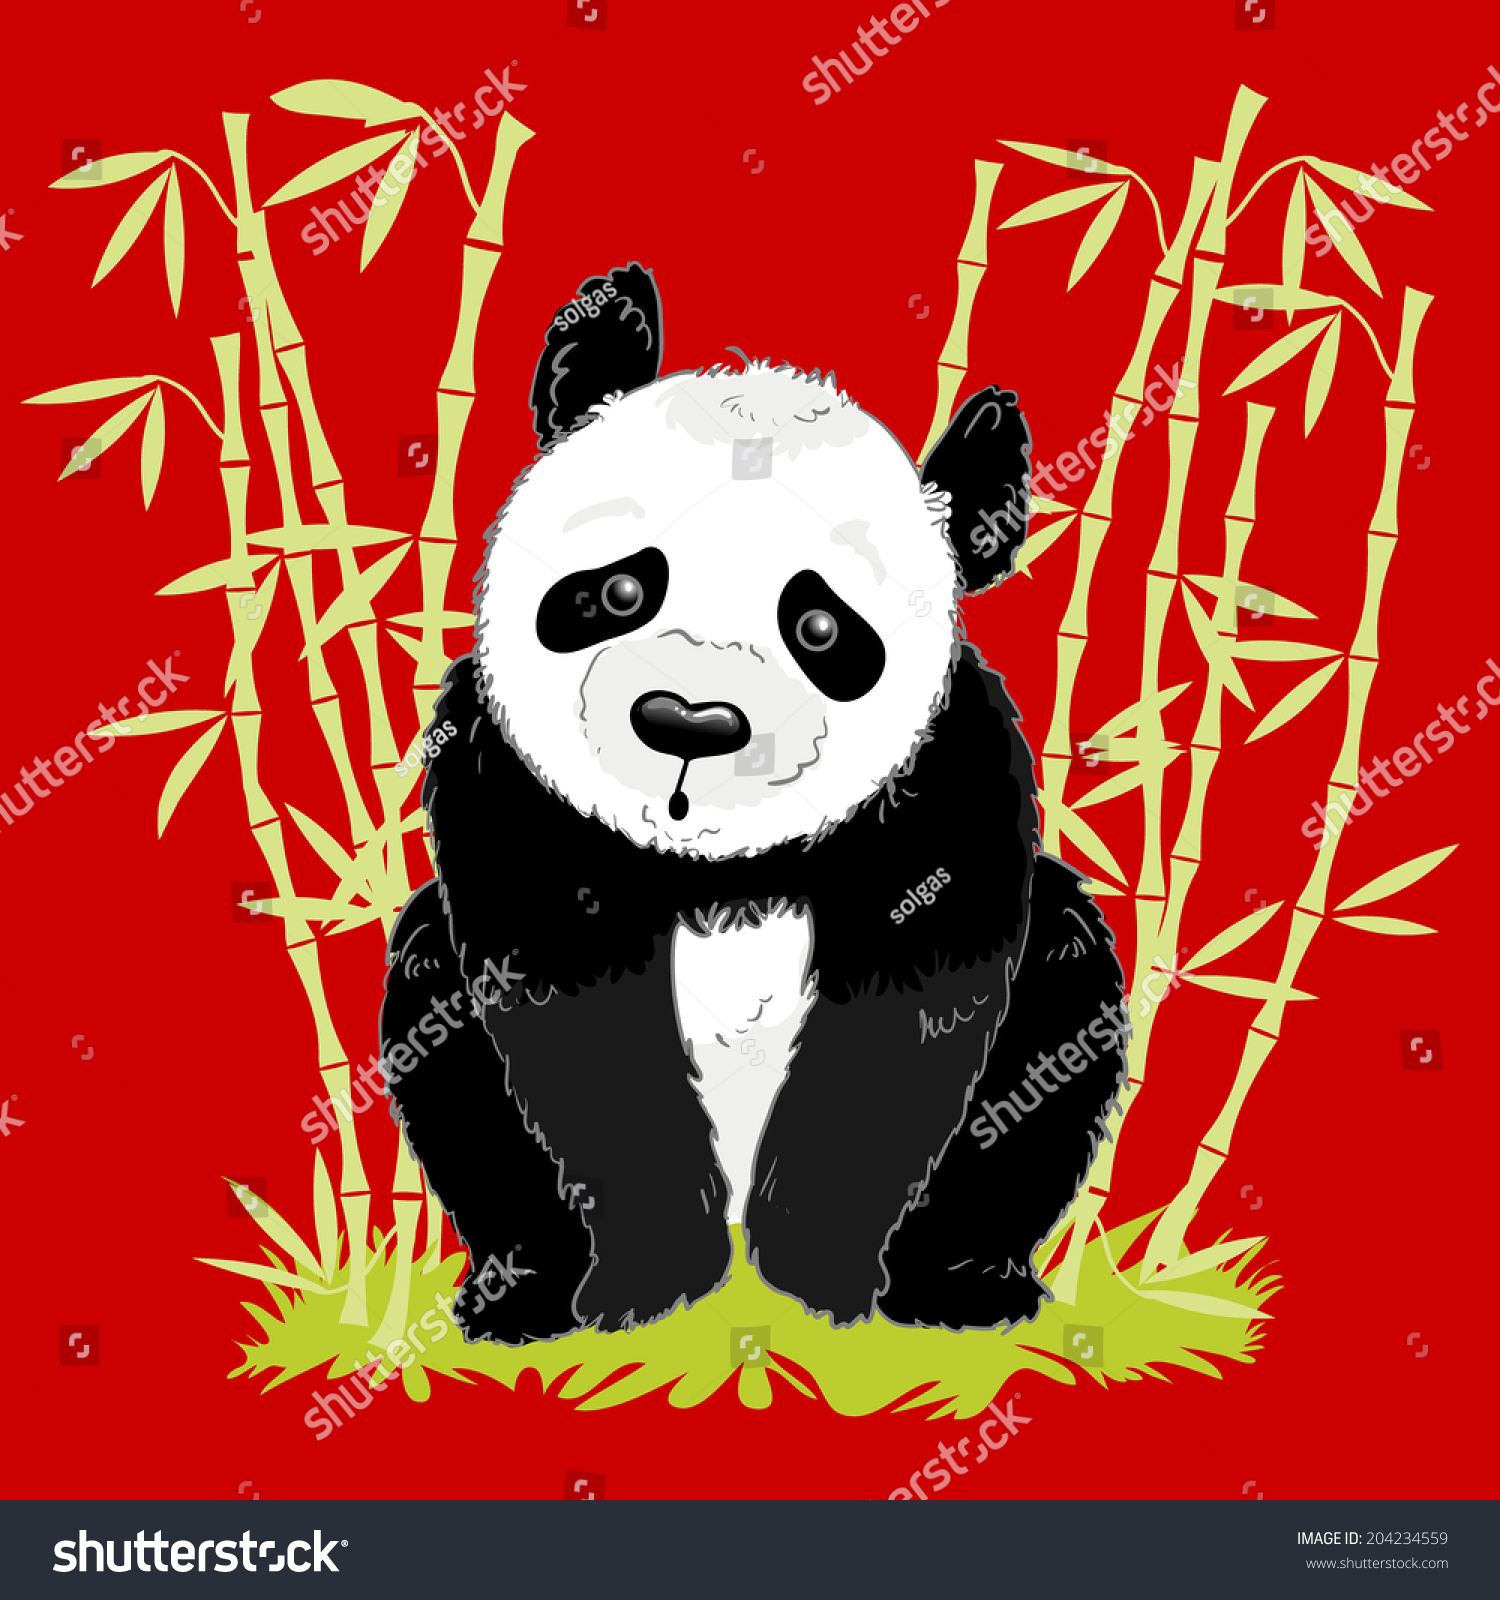 Vector Big Cartoon Panda On Red Background With Bamboo - 204234559